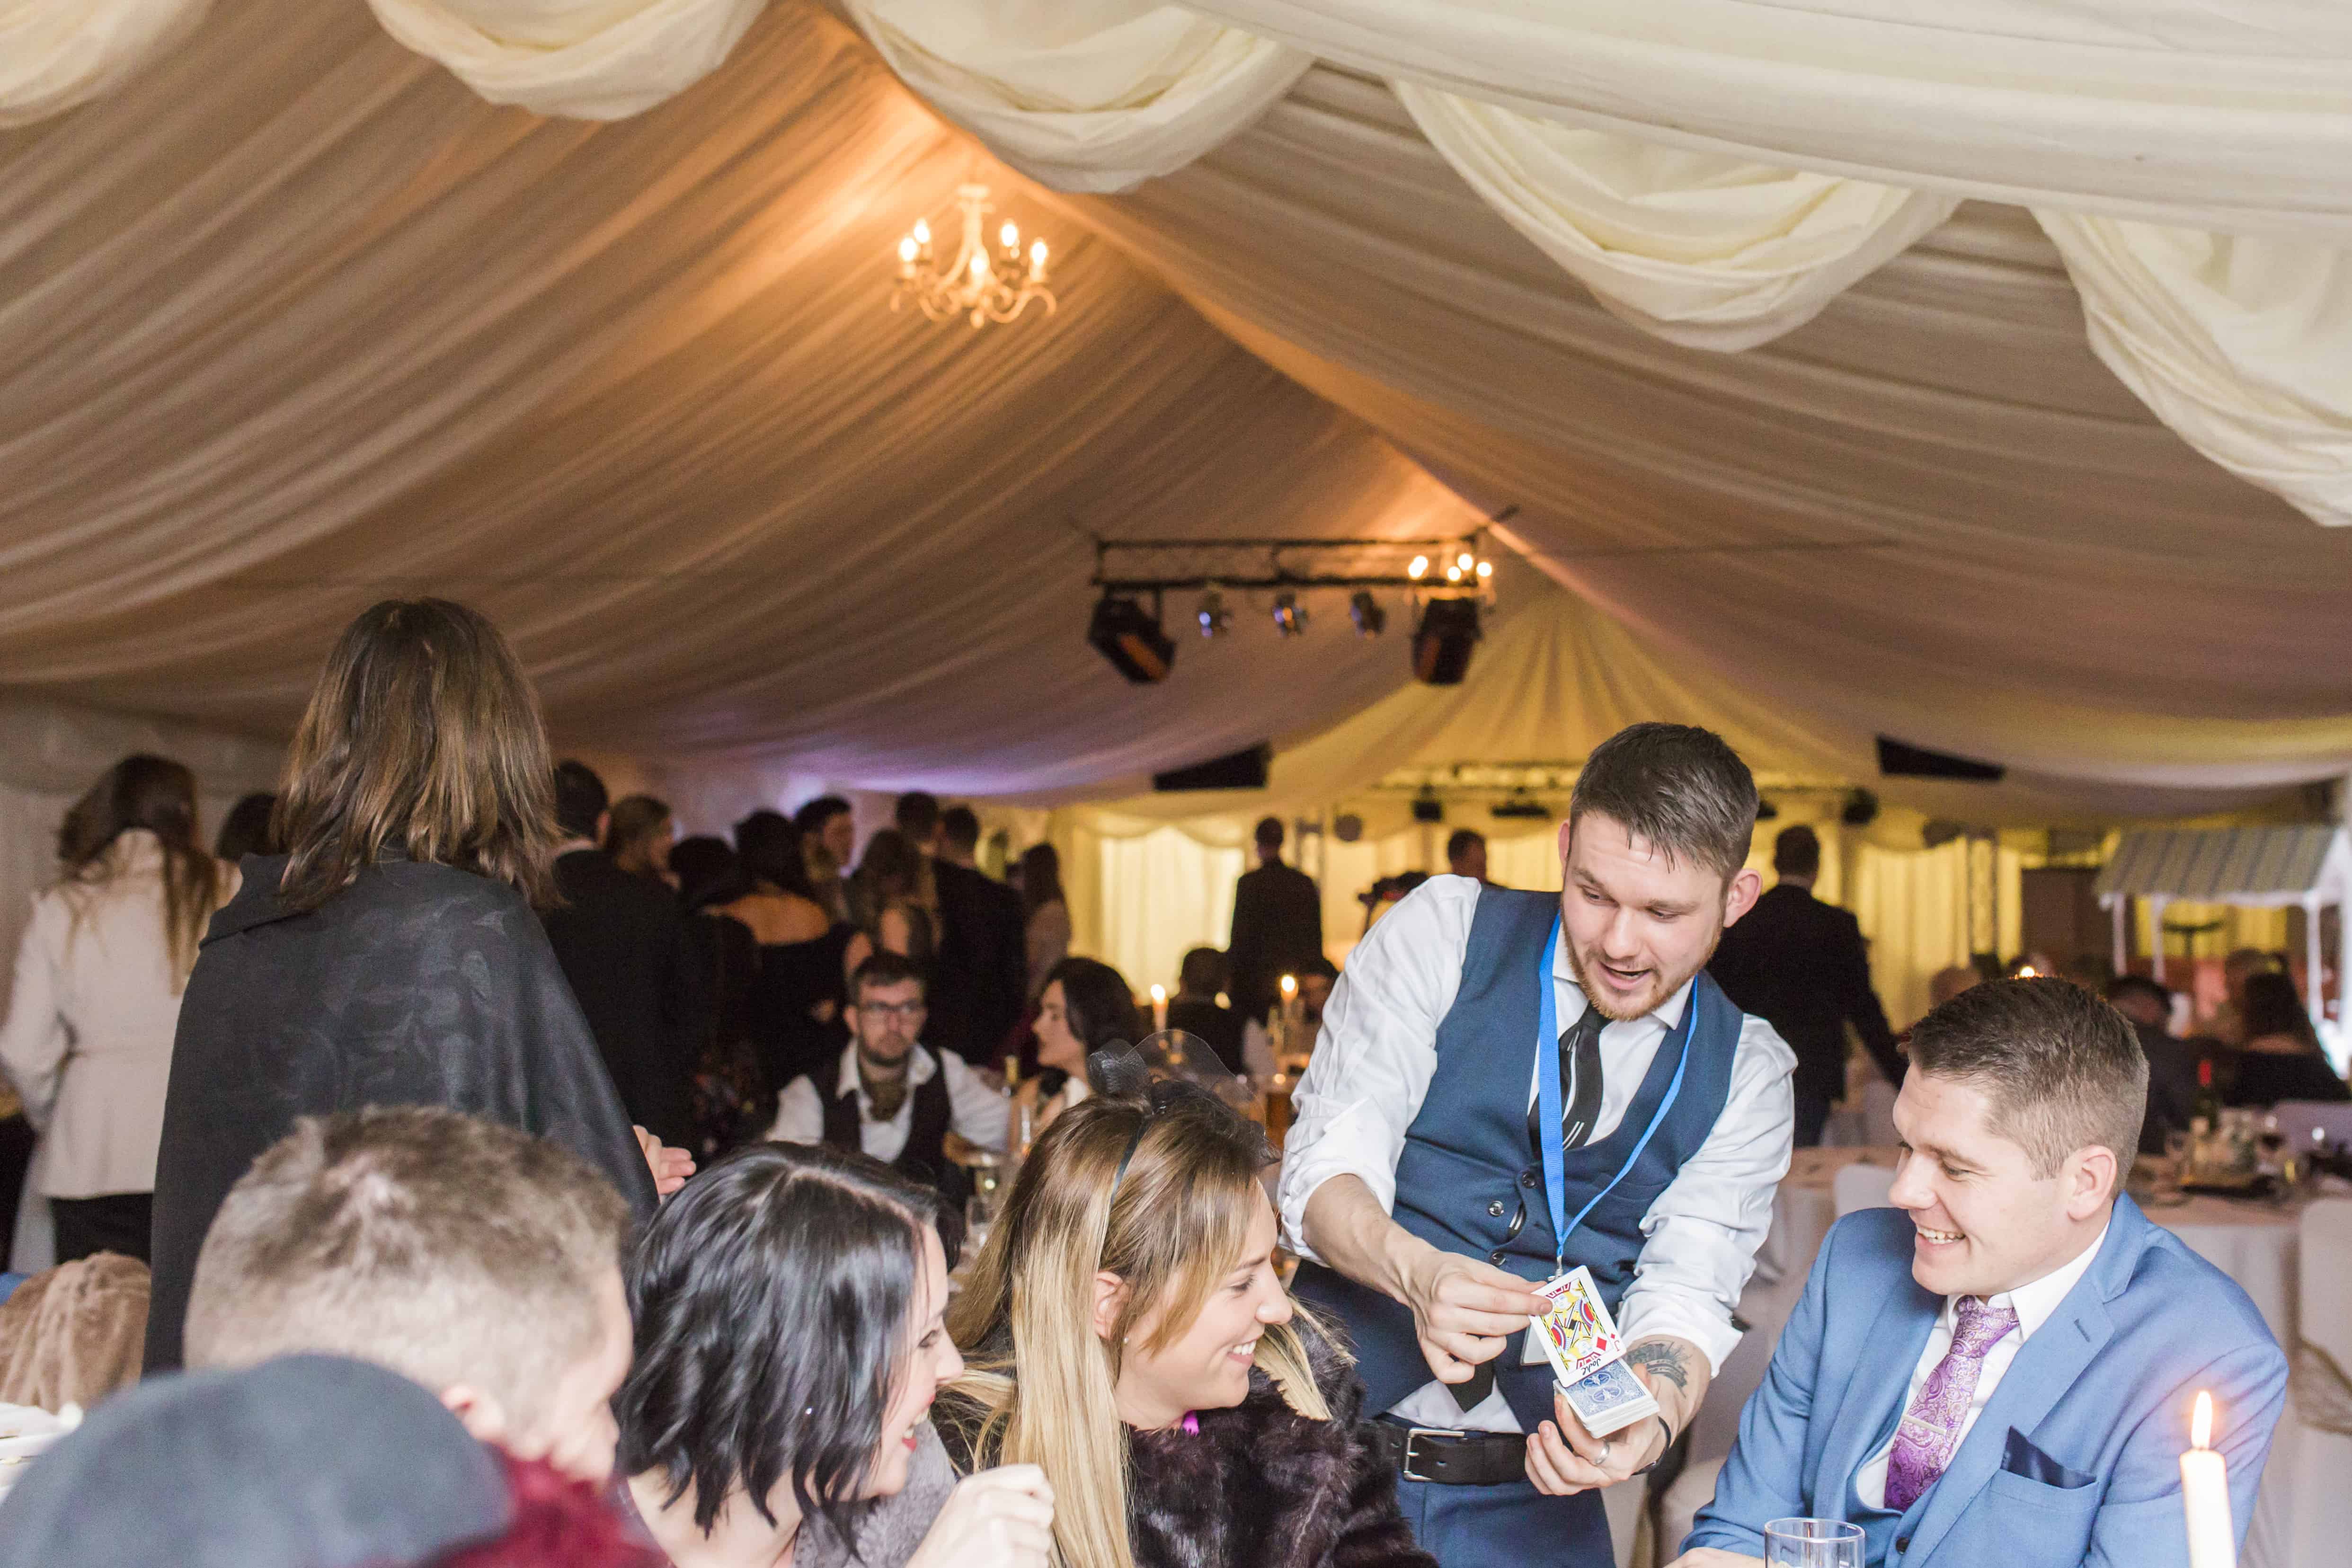 Performing close-up magic for private party in Leeds